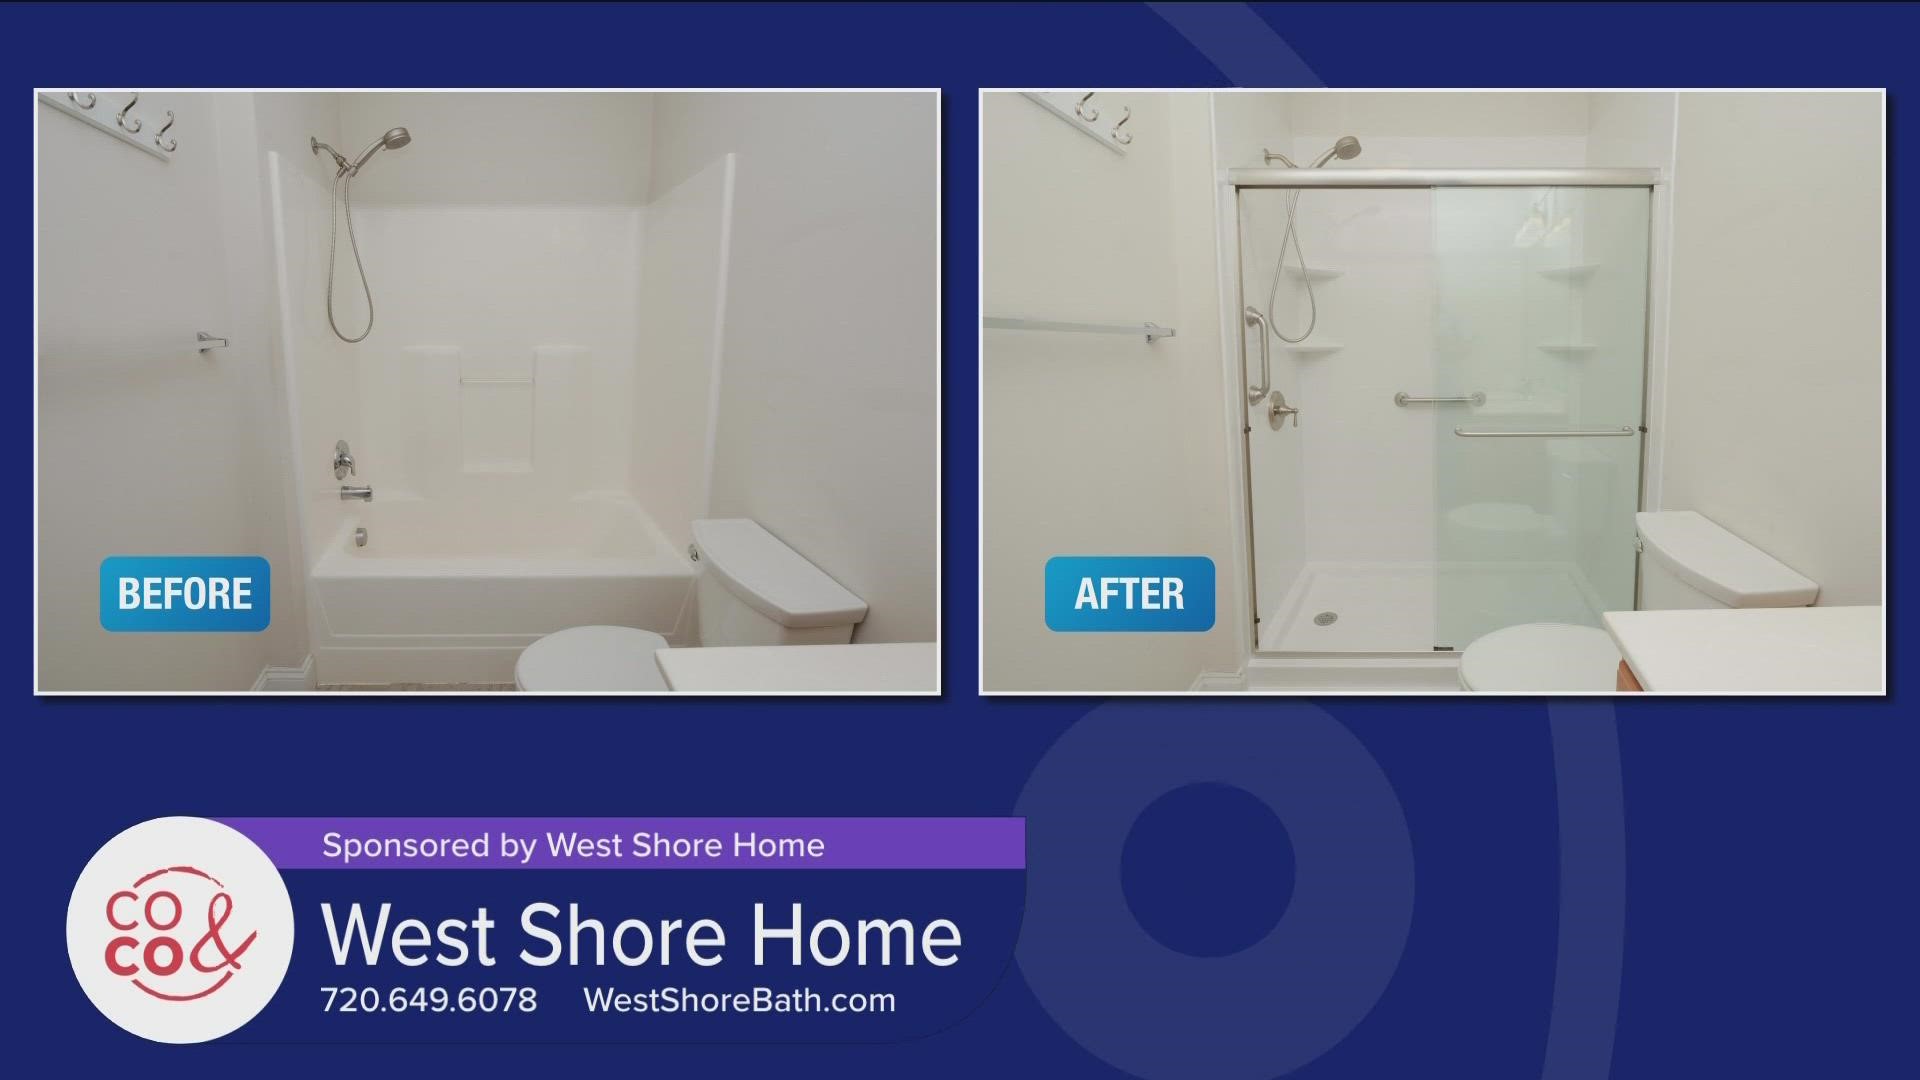 Call 720.649.6078 to get $500 off your next project with West Shore Home! Learn more at WestShoreBath.com. **PAID CONTENT**